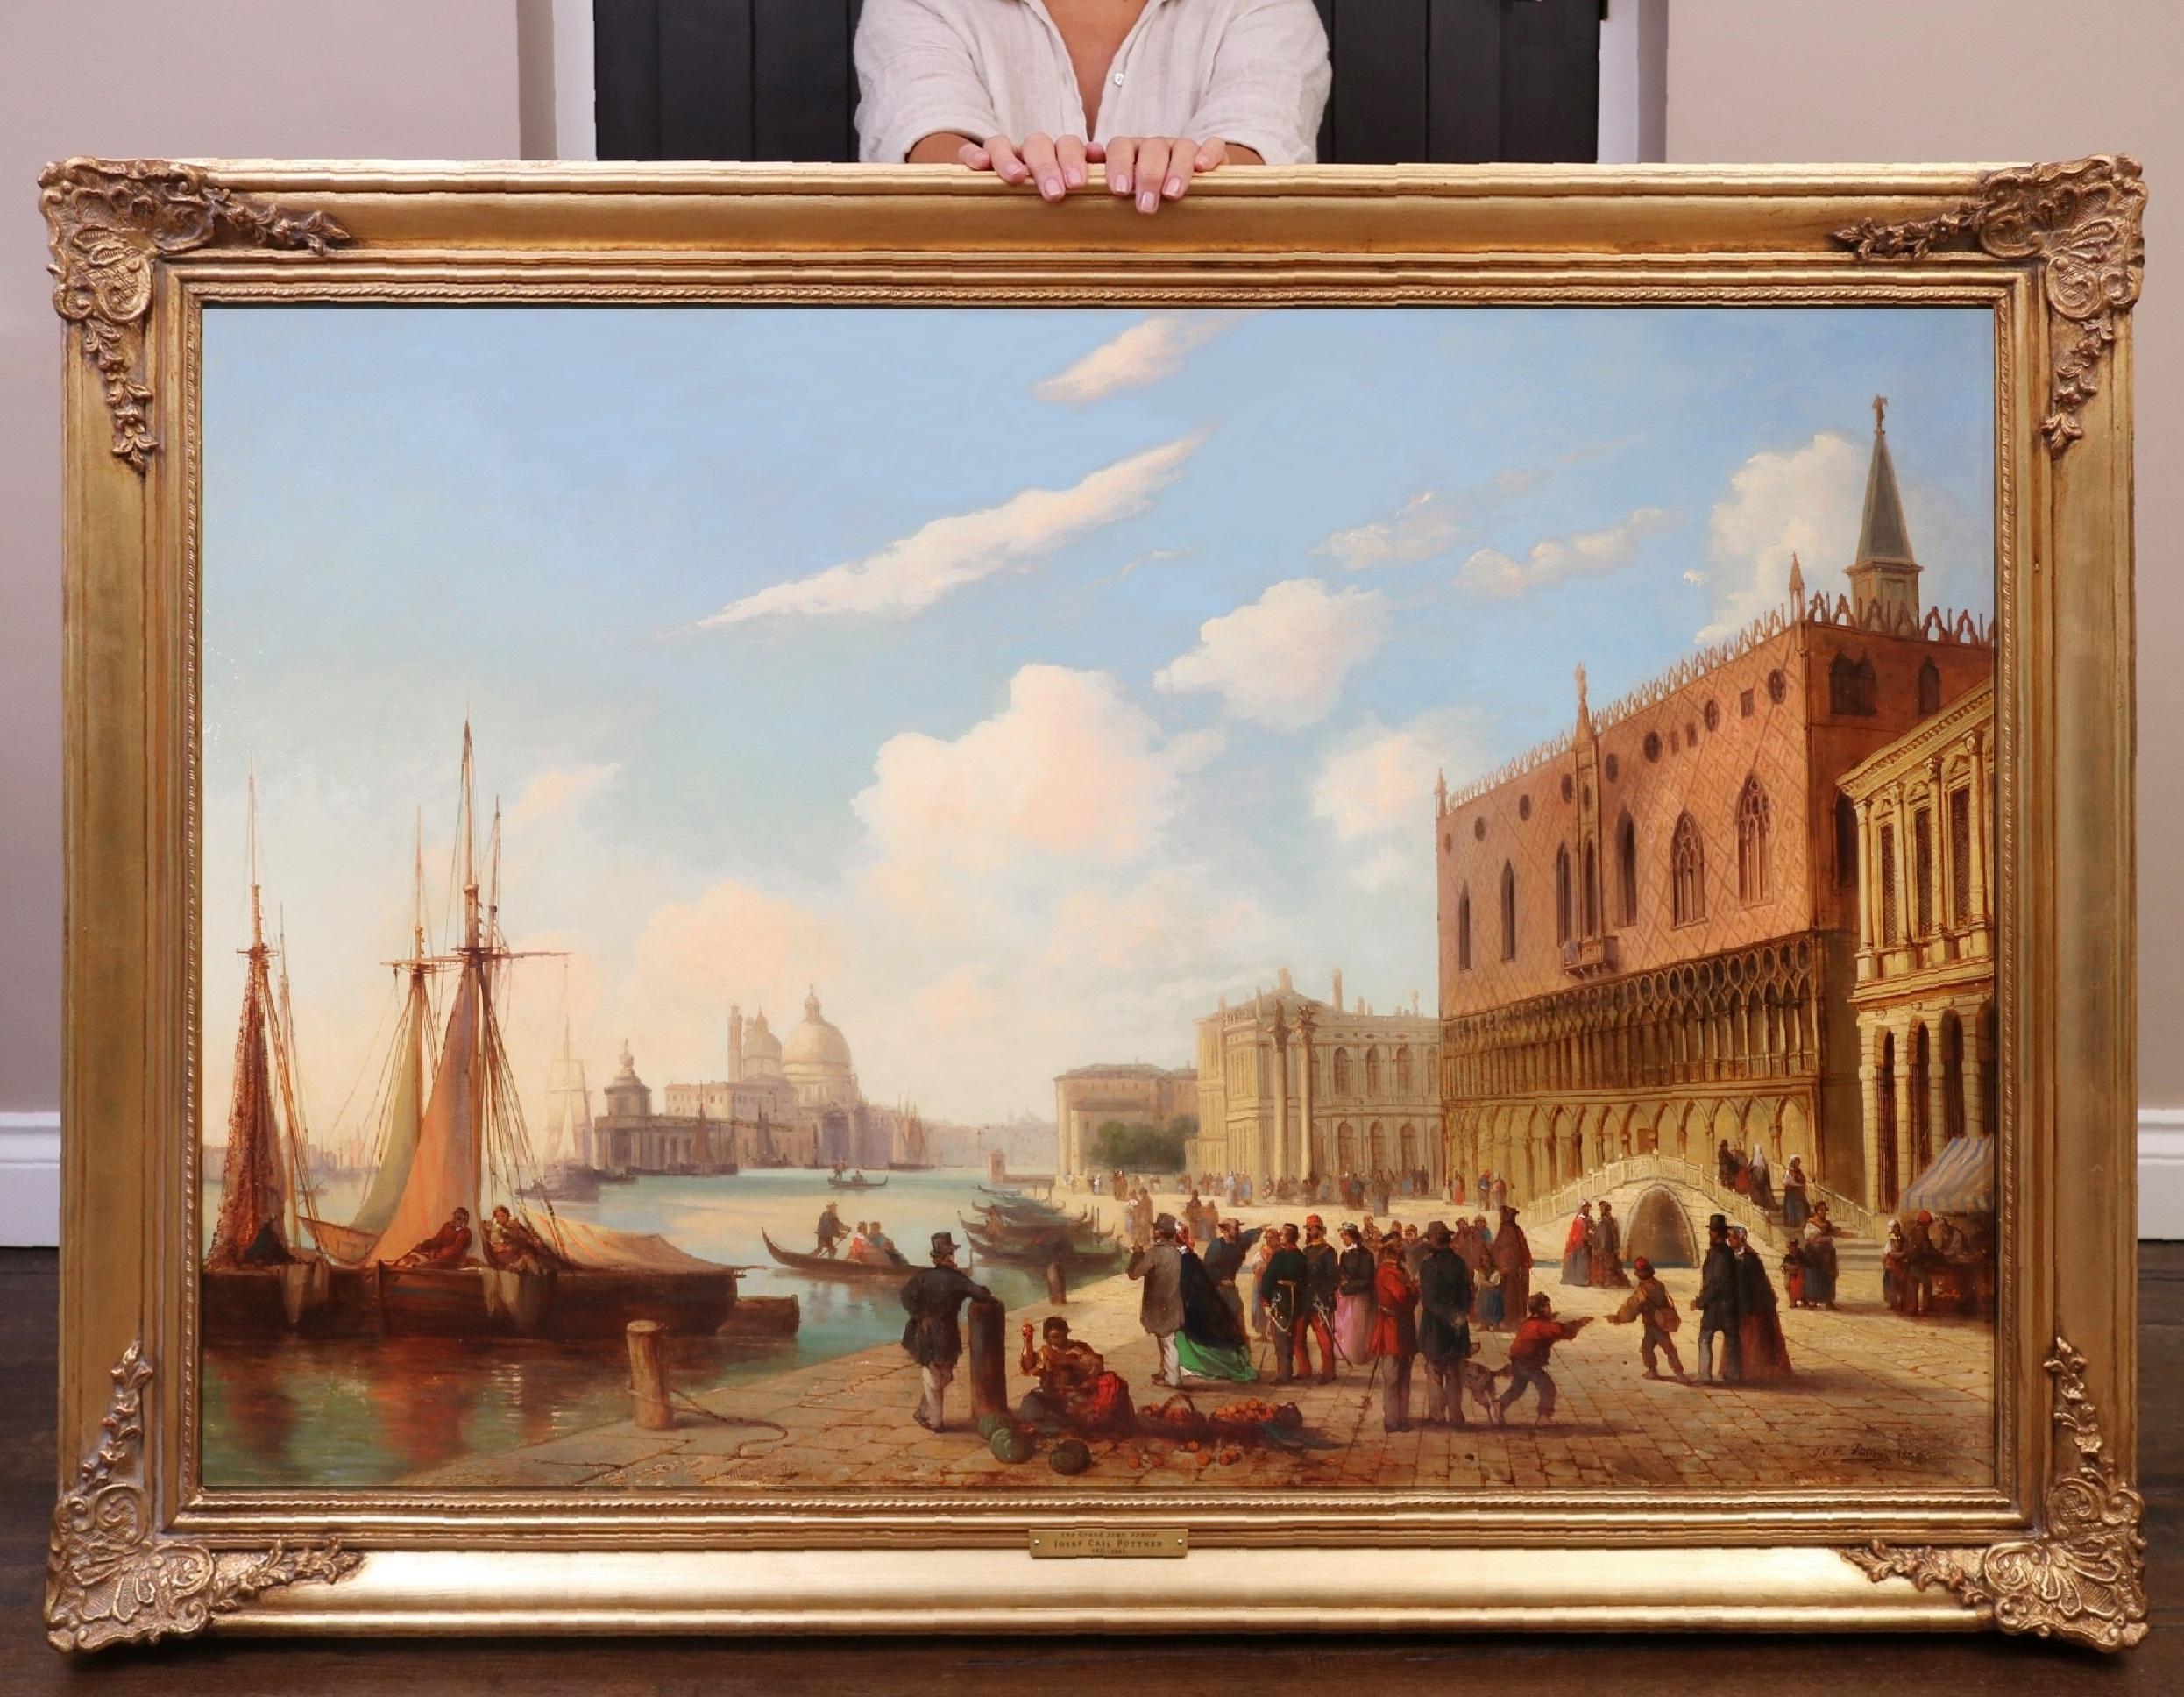 Josef Carl Puttner Figurative Painting - The Grand Tour Venice - 19th Century Venetian Oil Painting Ducal Palace St Marks